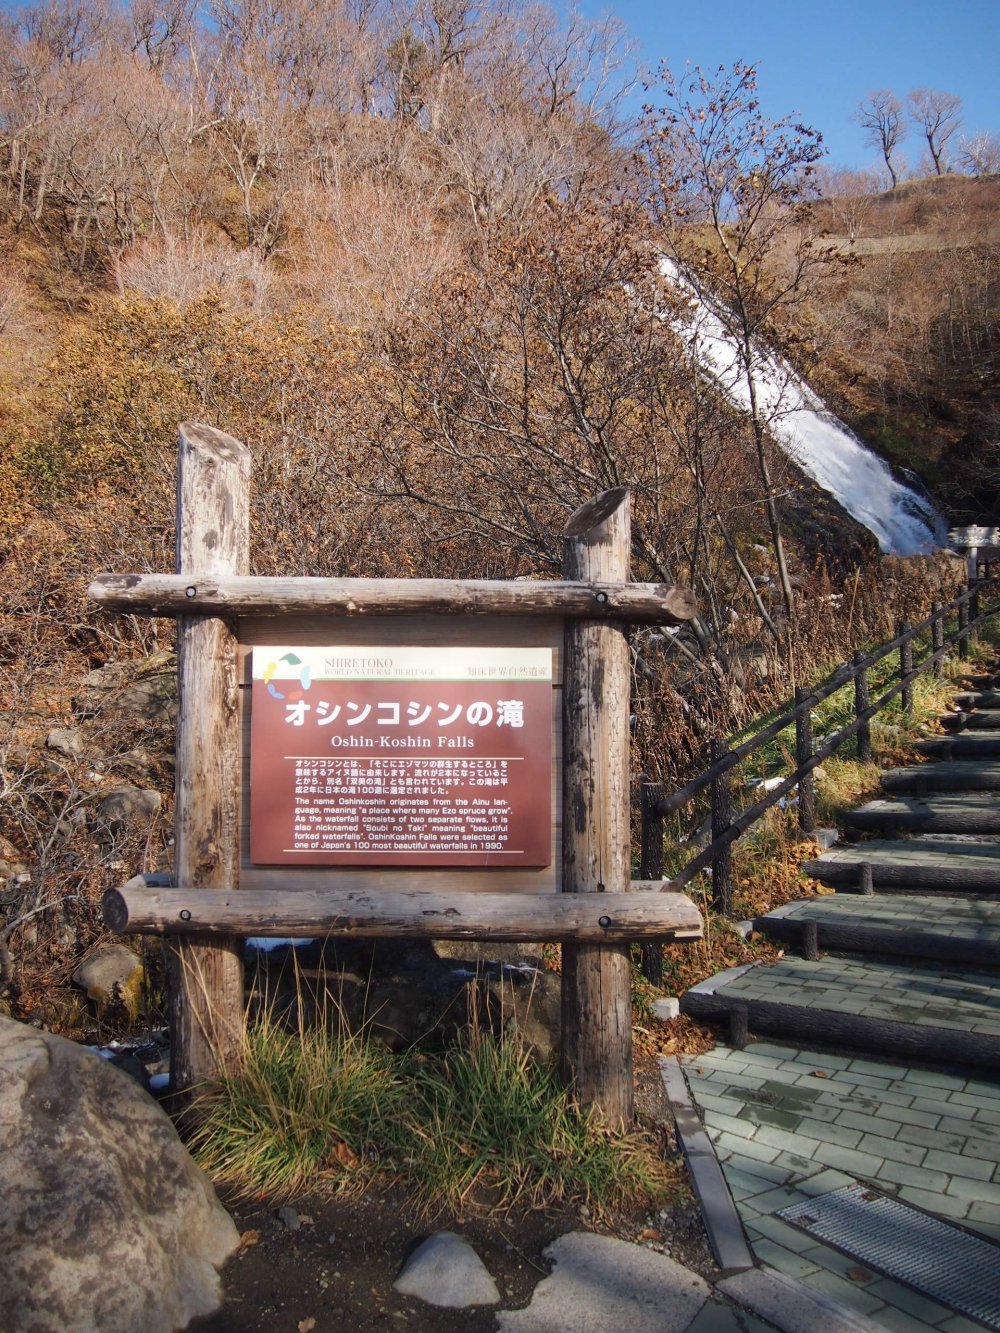 A description of the Oshinkoshin Waterfalls is available in both Japanese and English.